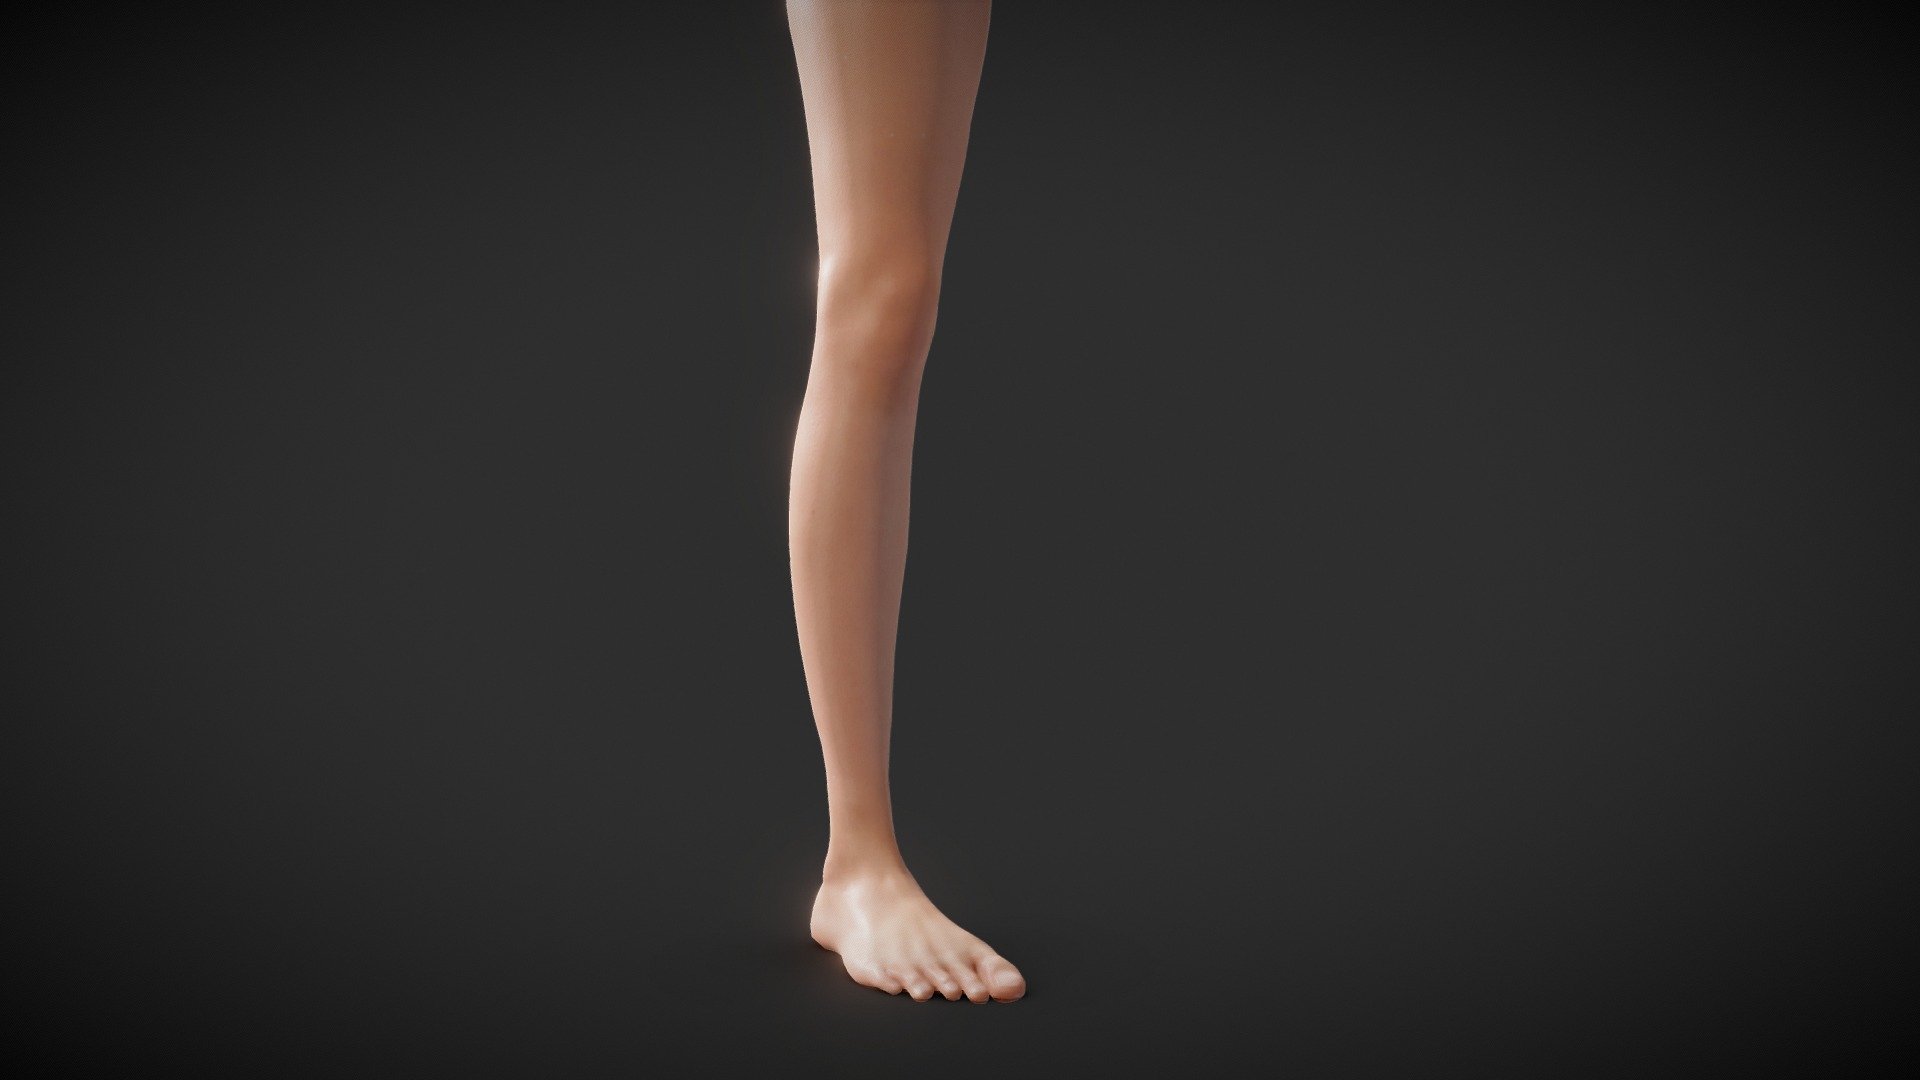 Full Female Body parts pack  is available here - https://skfb.ly/o8YnD

Male Version - https://skfb.ly/o8XW9

A Fit Female Anatomical Leg and Foot with Basic Textures.
Perfect for simulating tattoos and use in Procreate 3D

For Procreate Make sure to download and use the USDZ file if you want to automatically load the model with color texture, otherwise use the OBJ - Fit Female Anatomy - Leg and Foot base mesh - Buy Royalty Free 3D model by Deftroy 3d model